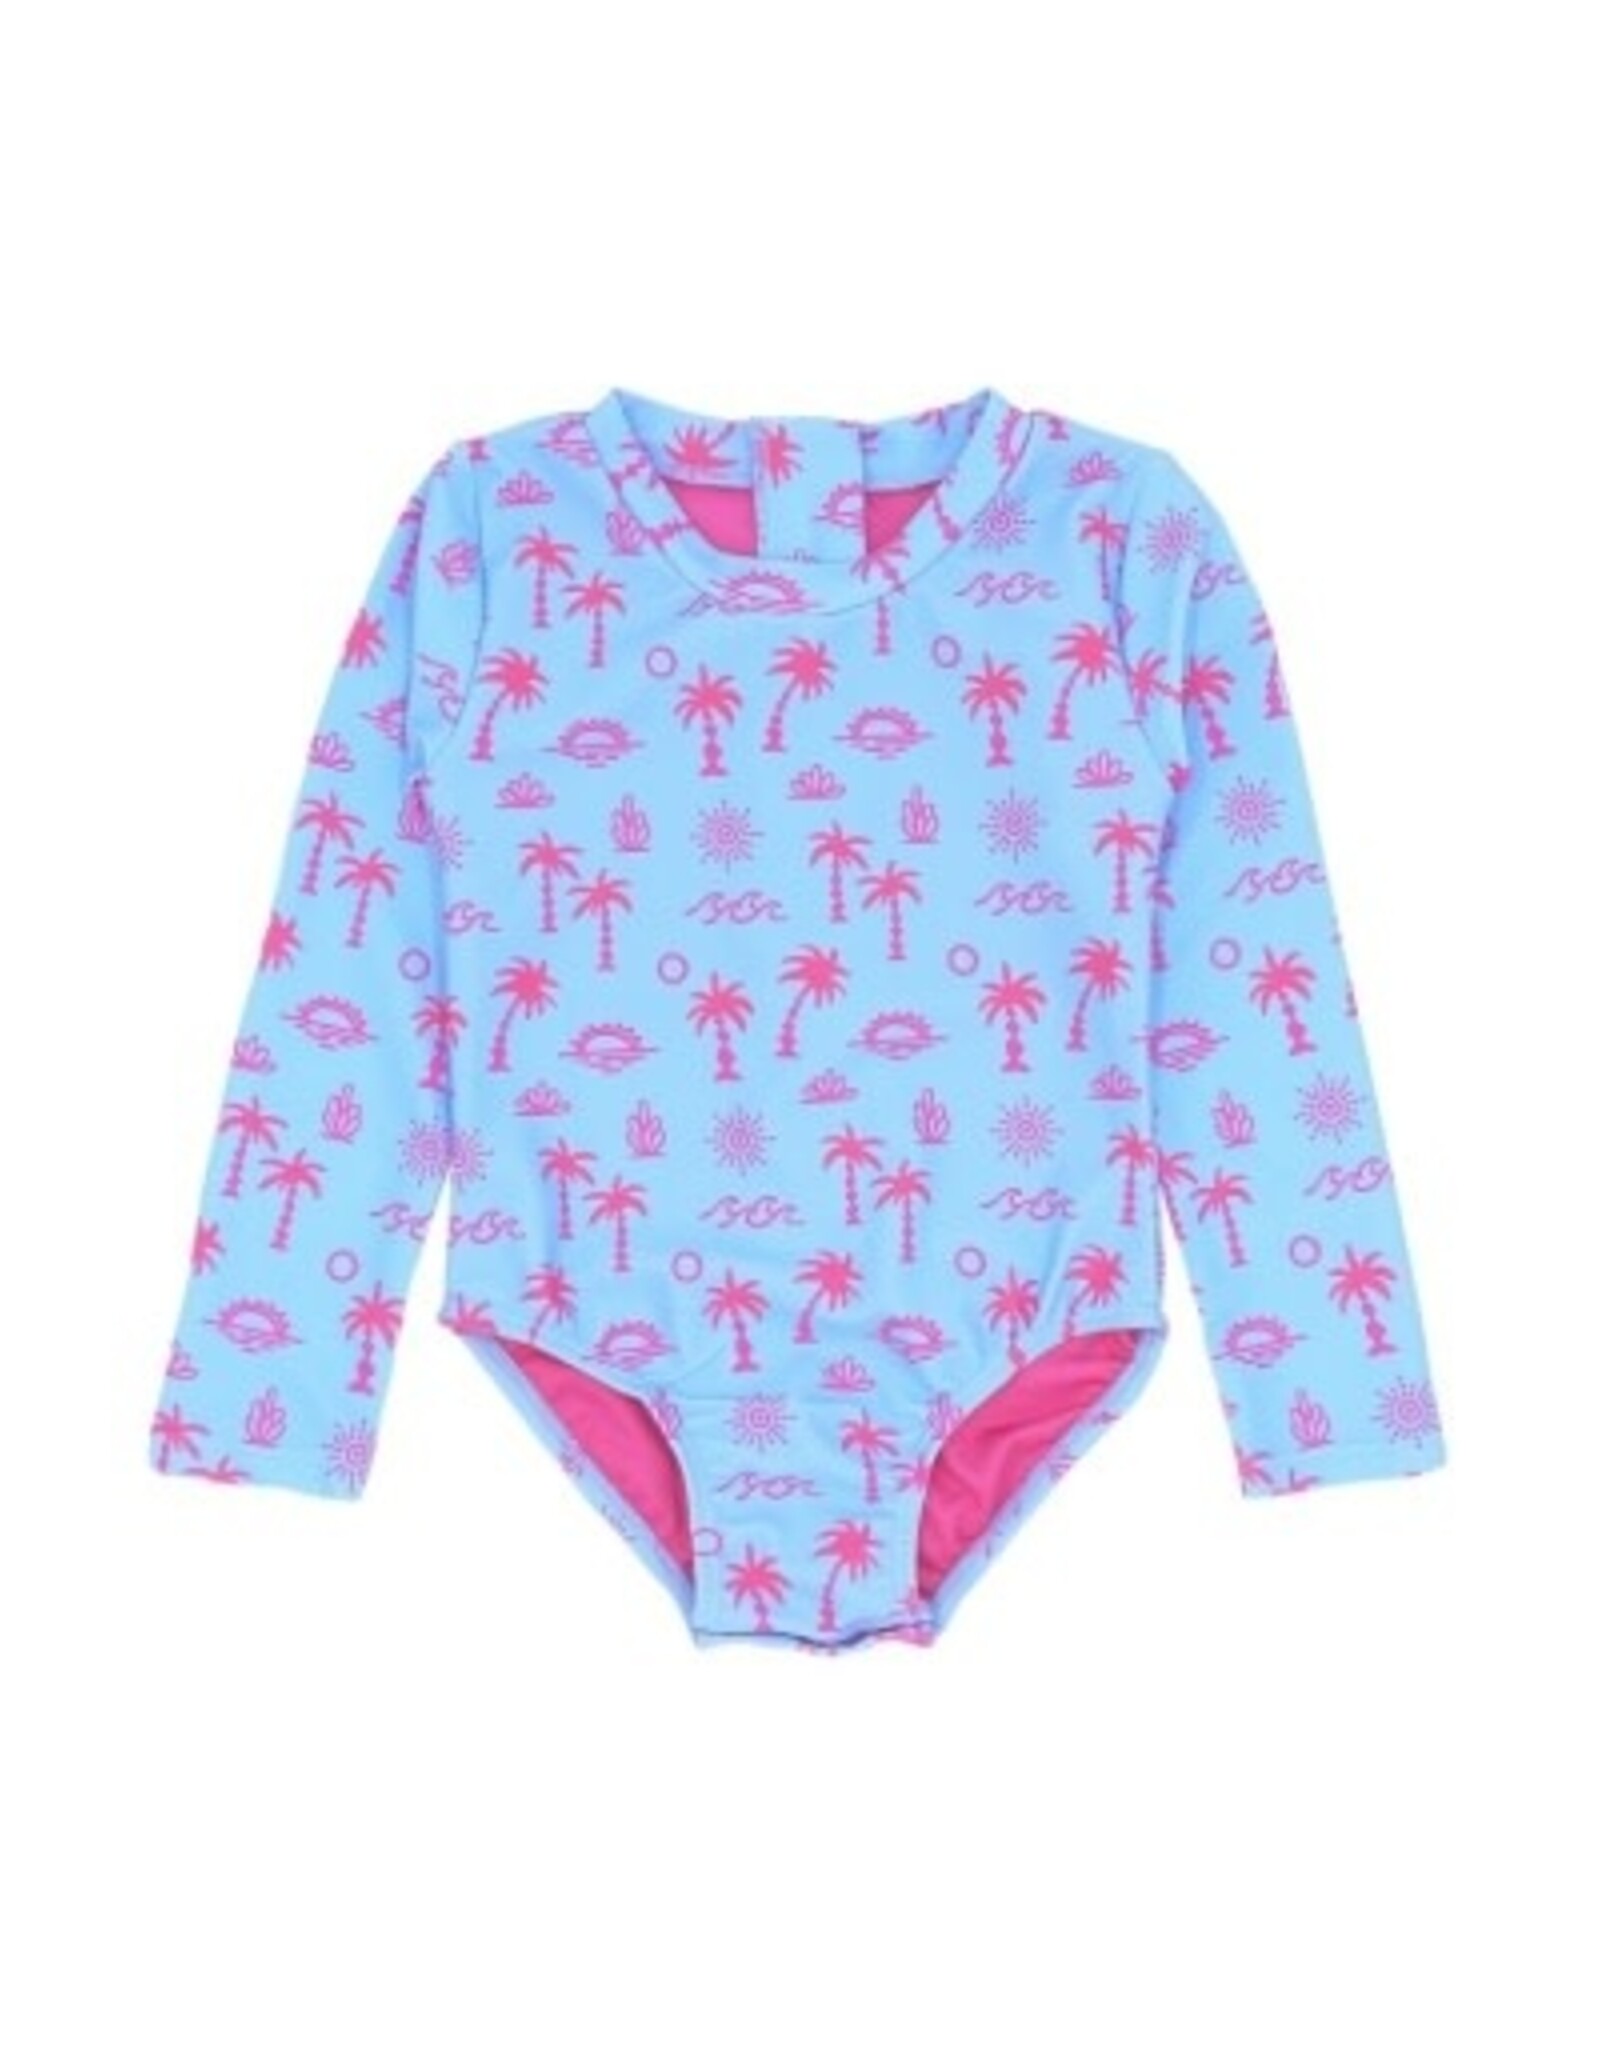 Feather 4 Arrow WAVE CHASER BABY SURF SUIT